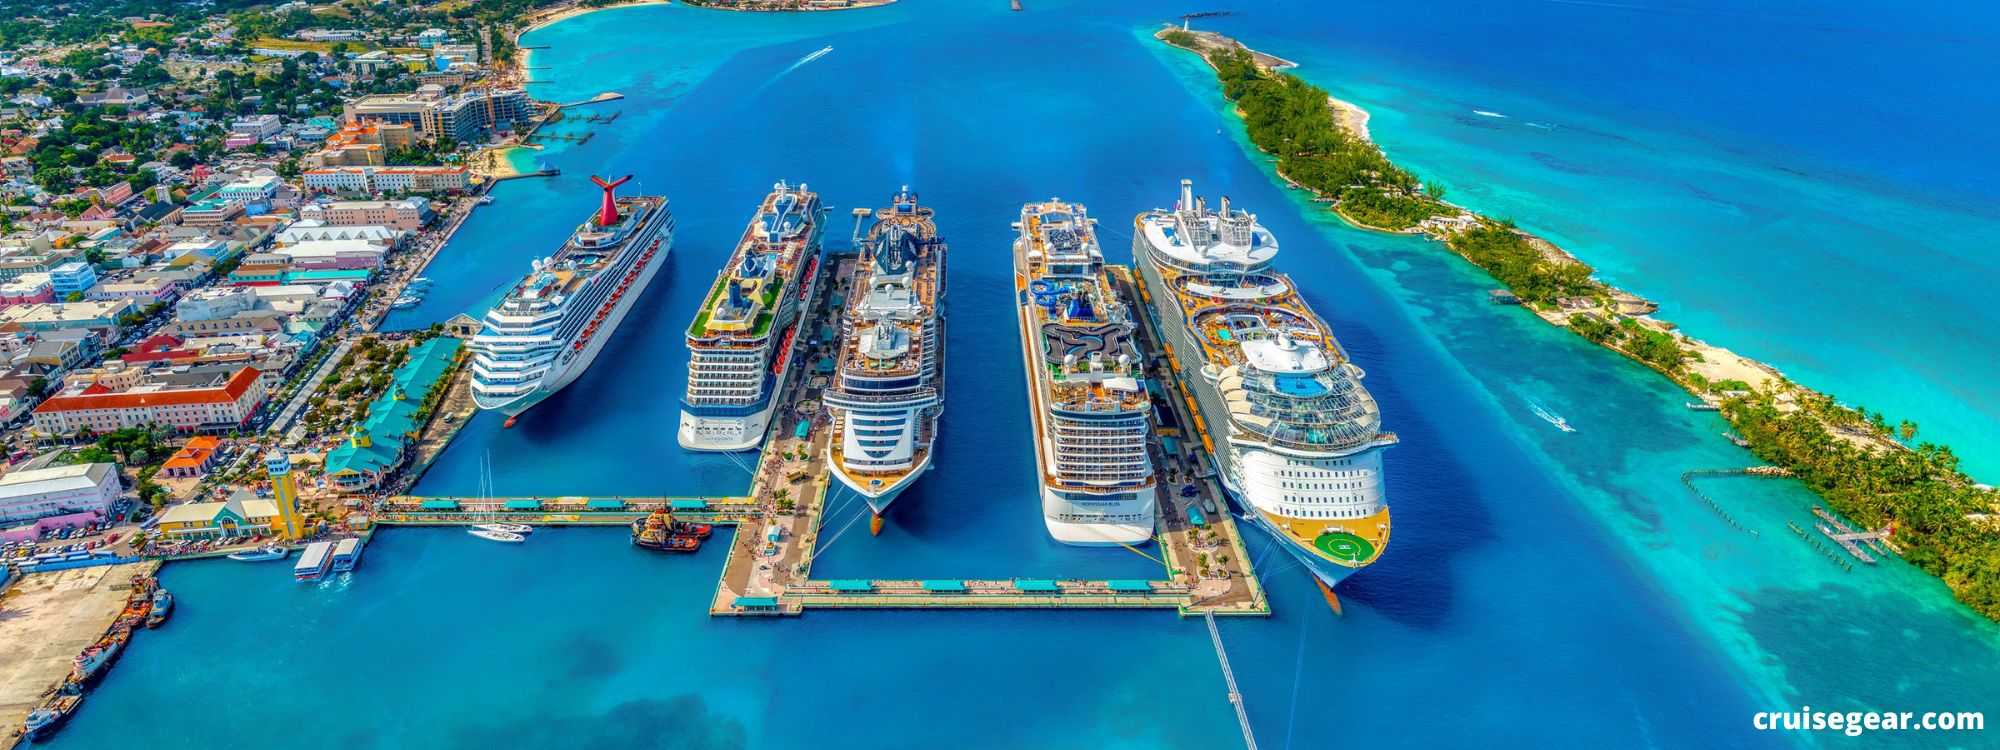 Compare Major Cruise Lines – A Guide To Choosing The Perfect Cruise Brand